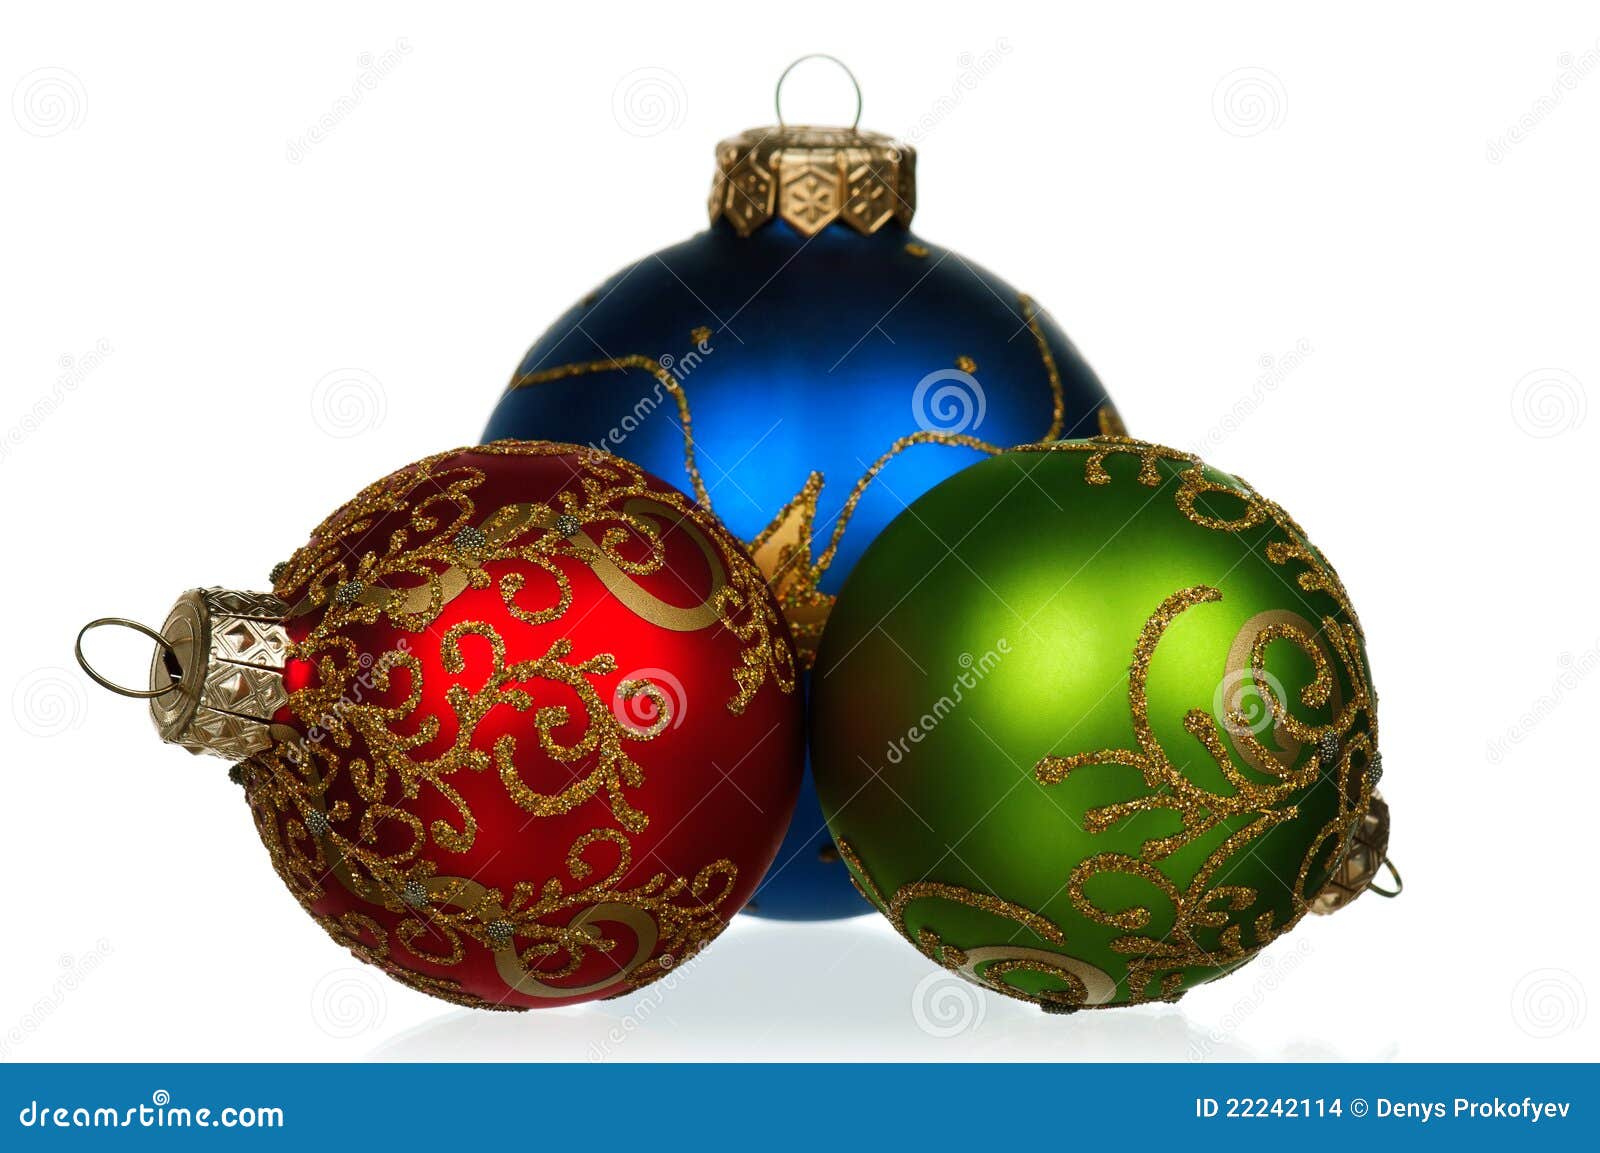 Set of baubles stock photo. Image of ball, claus, abstract - 22242114